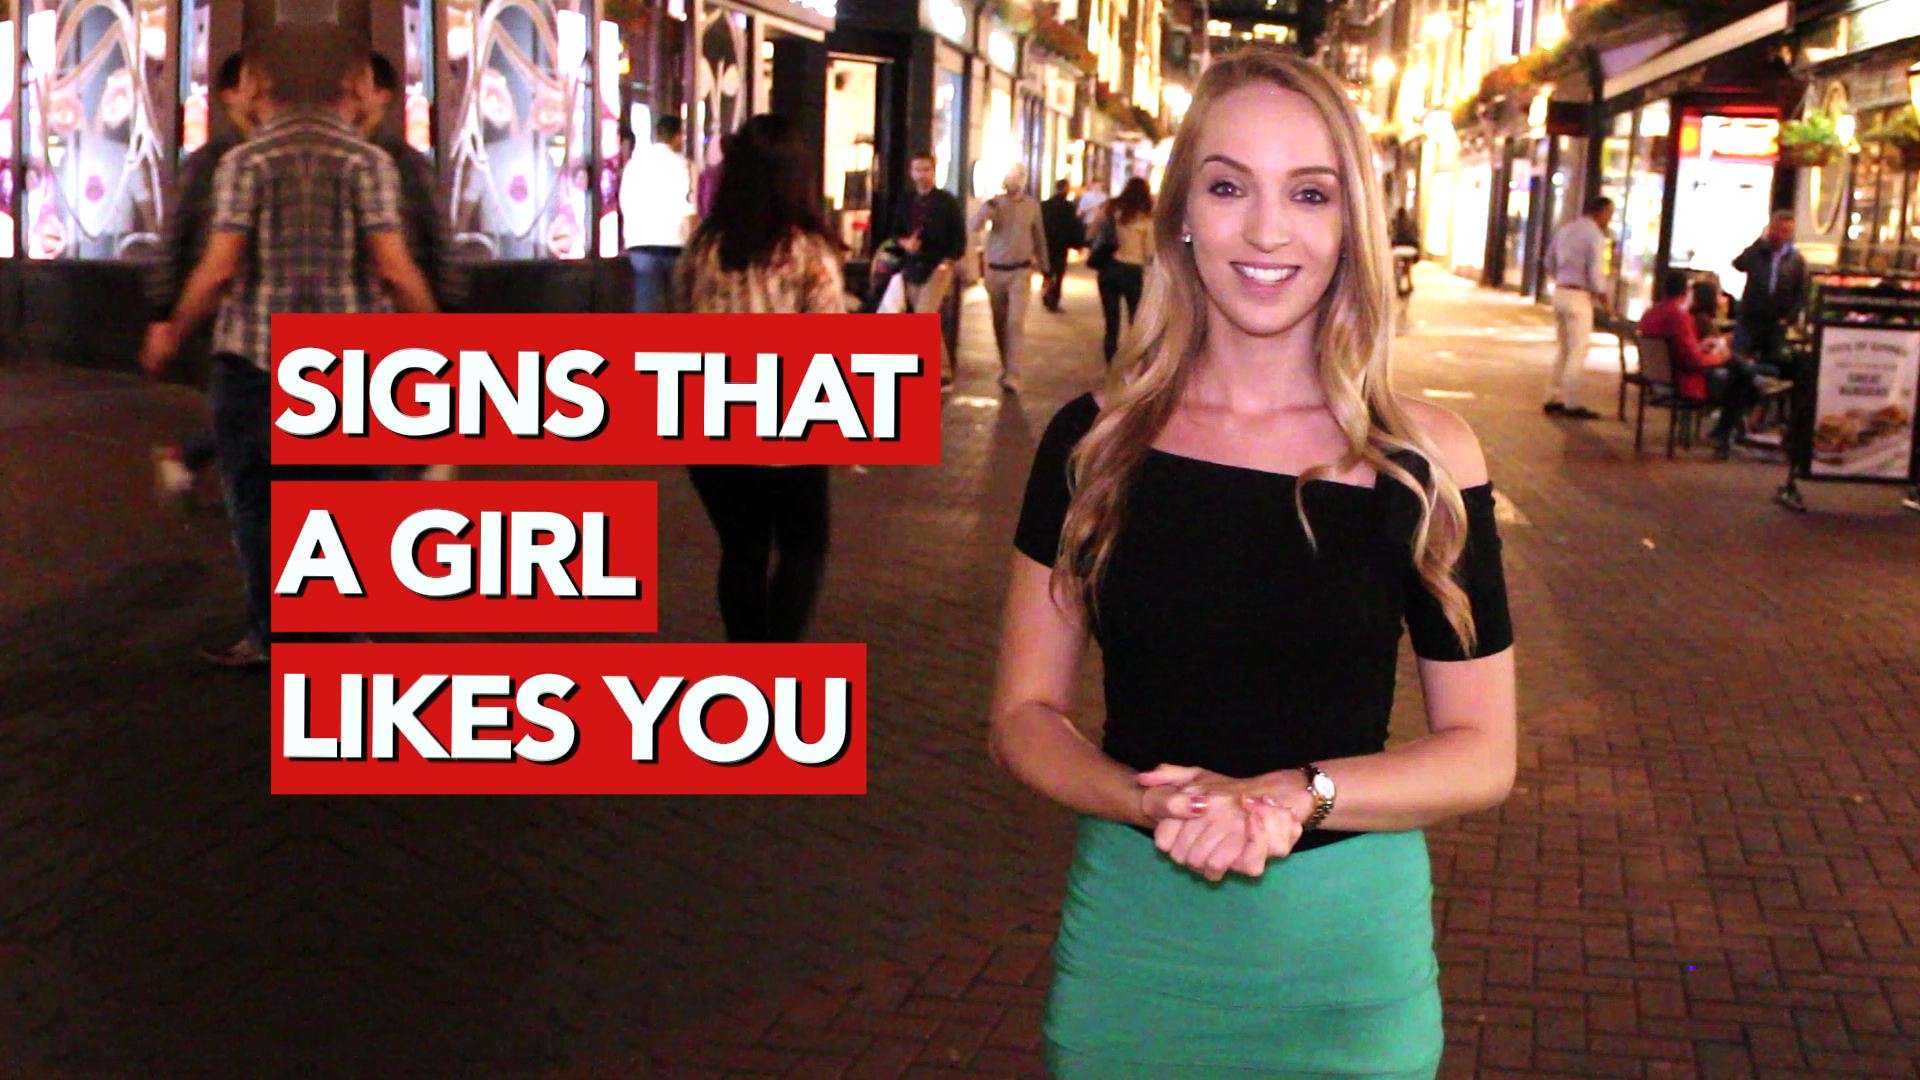 Signs That a Girl Likes You